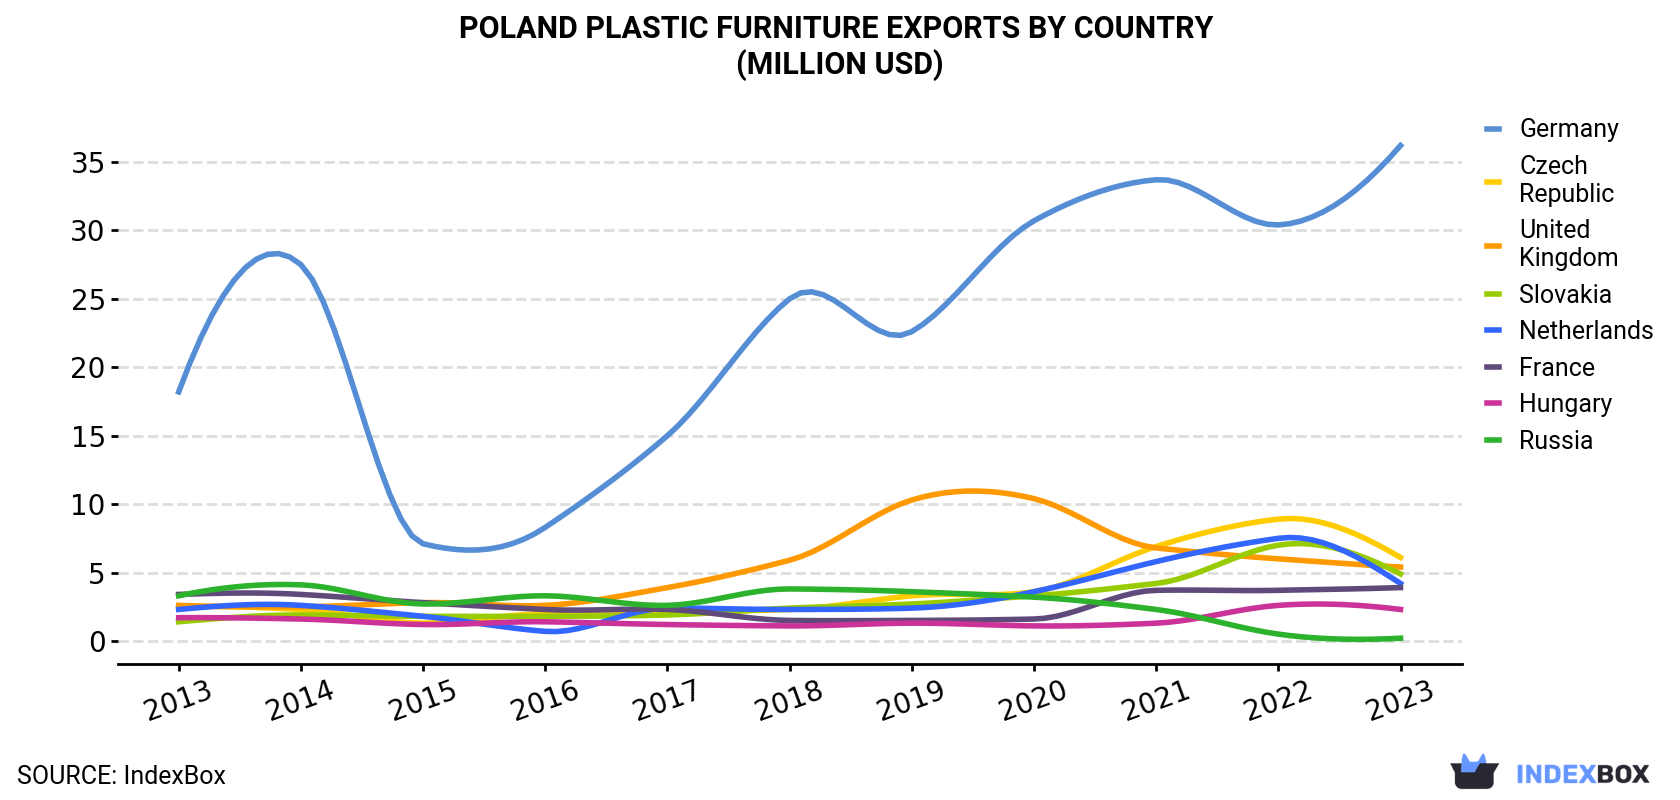 Poland Plastic Furniture Exports By Country (Million USD)